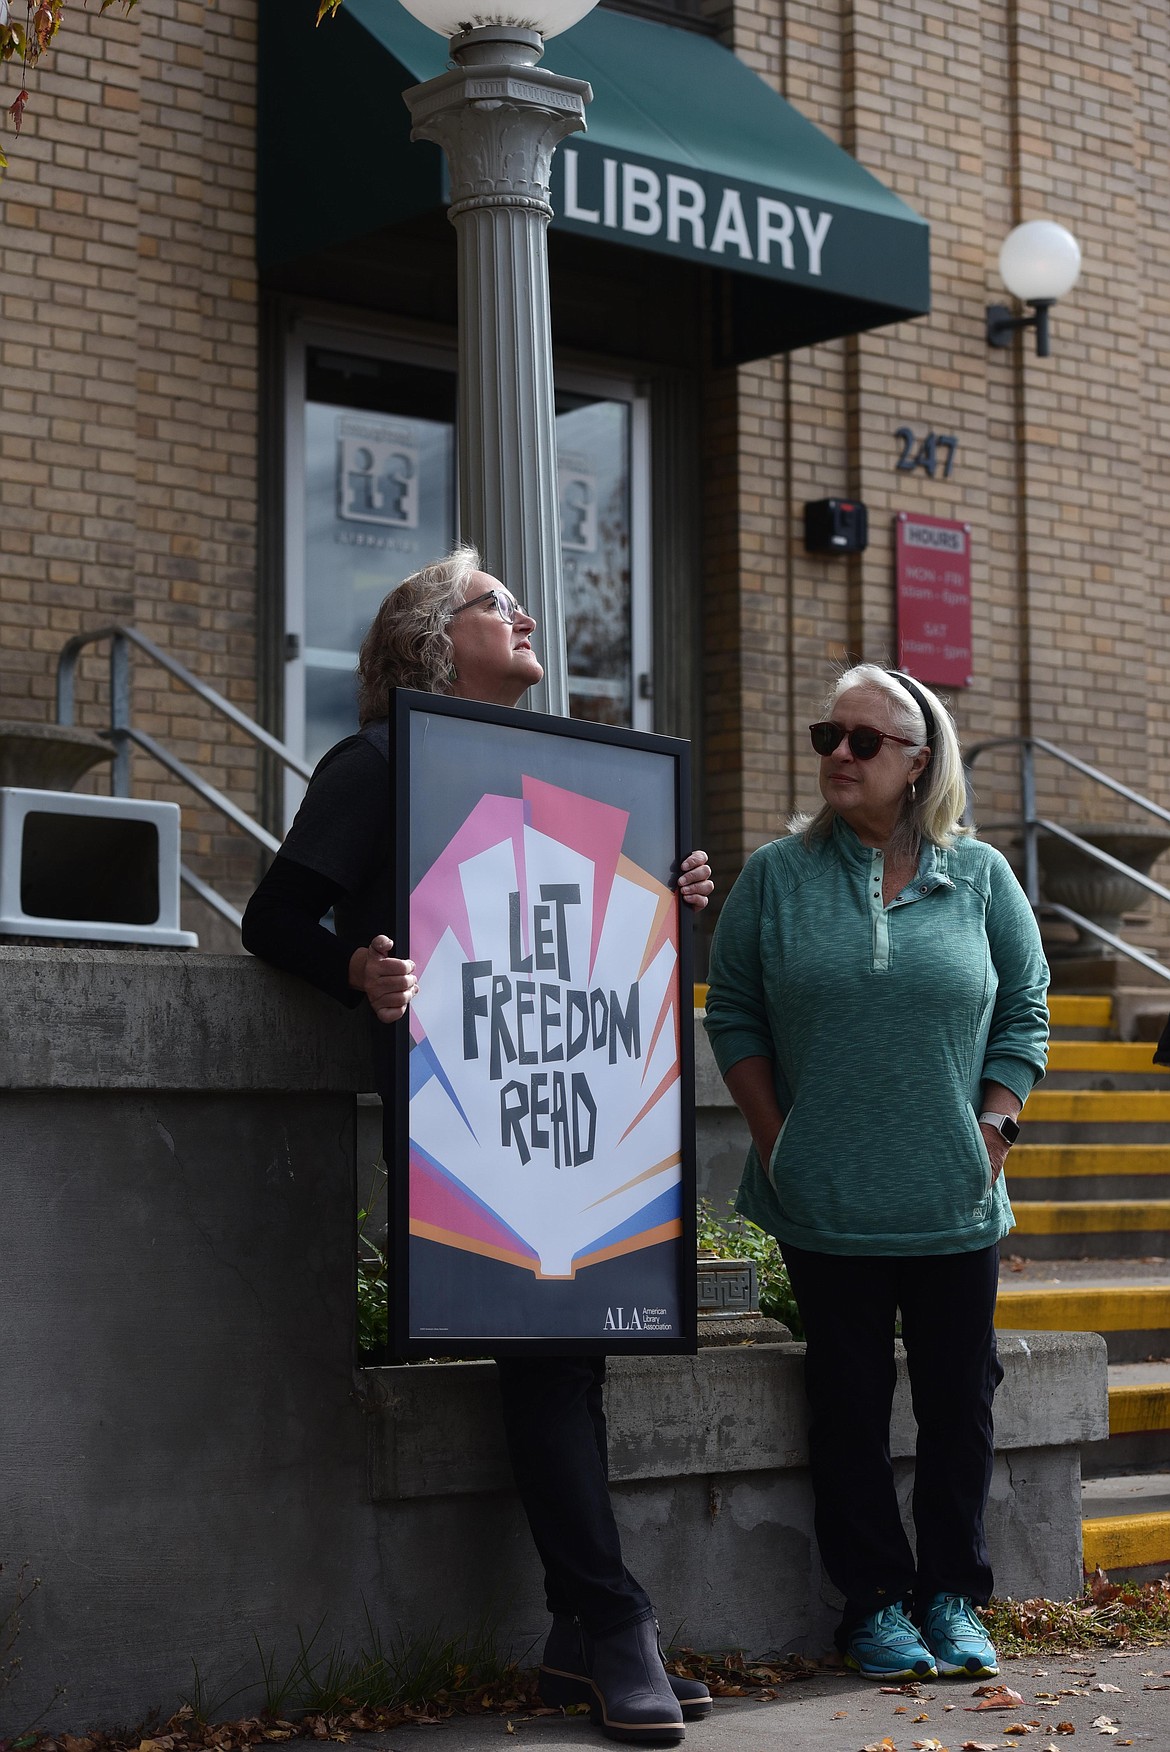 Valeri McGarvey, a Kalispell resident and library patron, holds a sign in support of Banned Books Week outside the Kalispell branch of ImagineIF Libraries on Monday, Oct. 2. (Derrick Perkins/Daily Inter Lake)